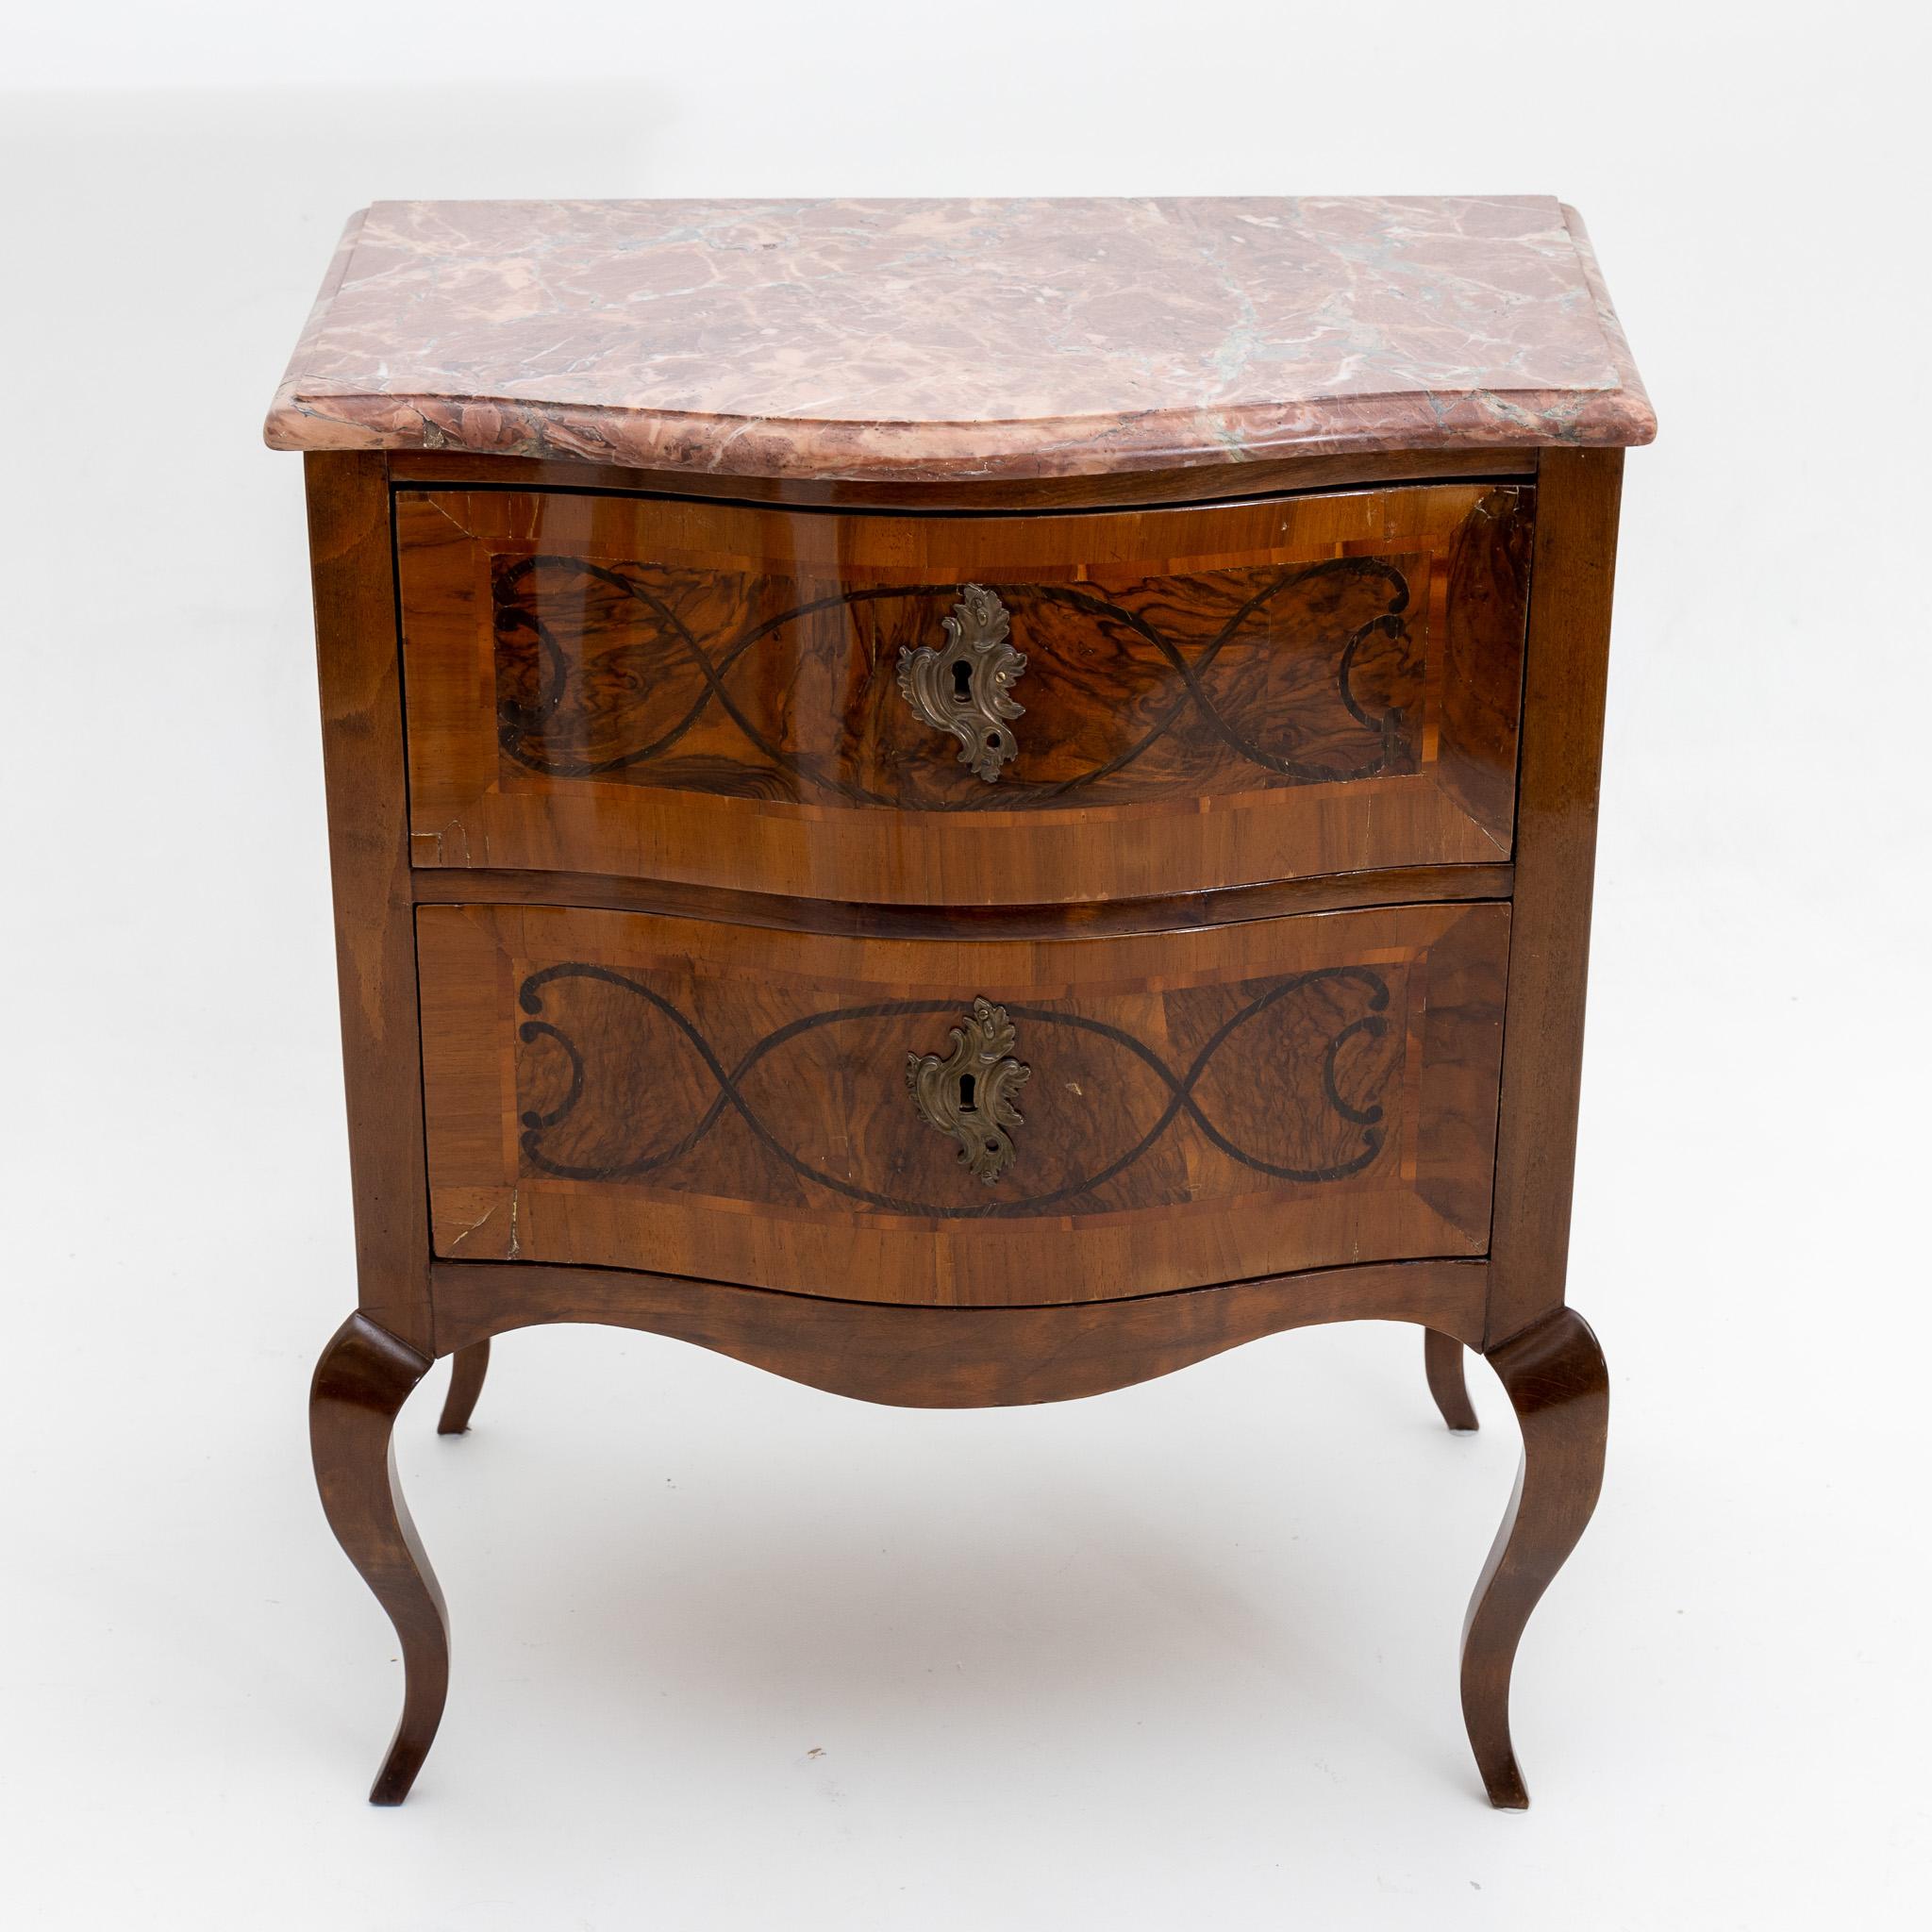 Small chest of drawers in Baroque style with two drawers, curved frame and flared S-legs. The slightly bulging front is decorated with rocaille-shaped fittings and inlaid with ribbonwork. The walnut veneered corpus is in an unrestored condition and